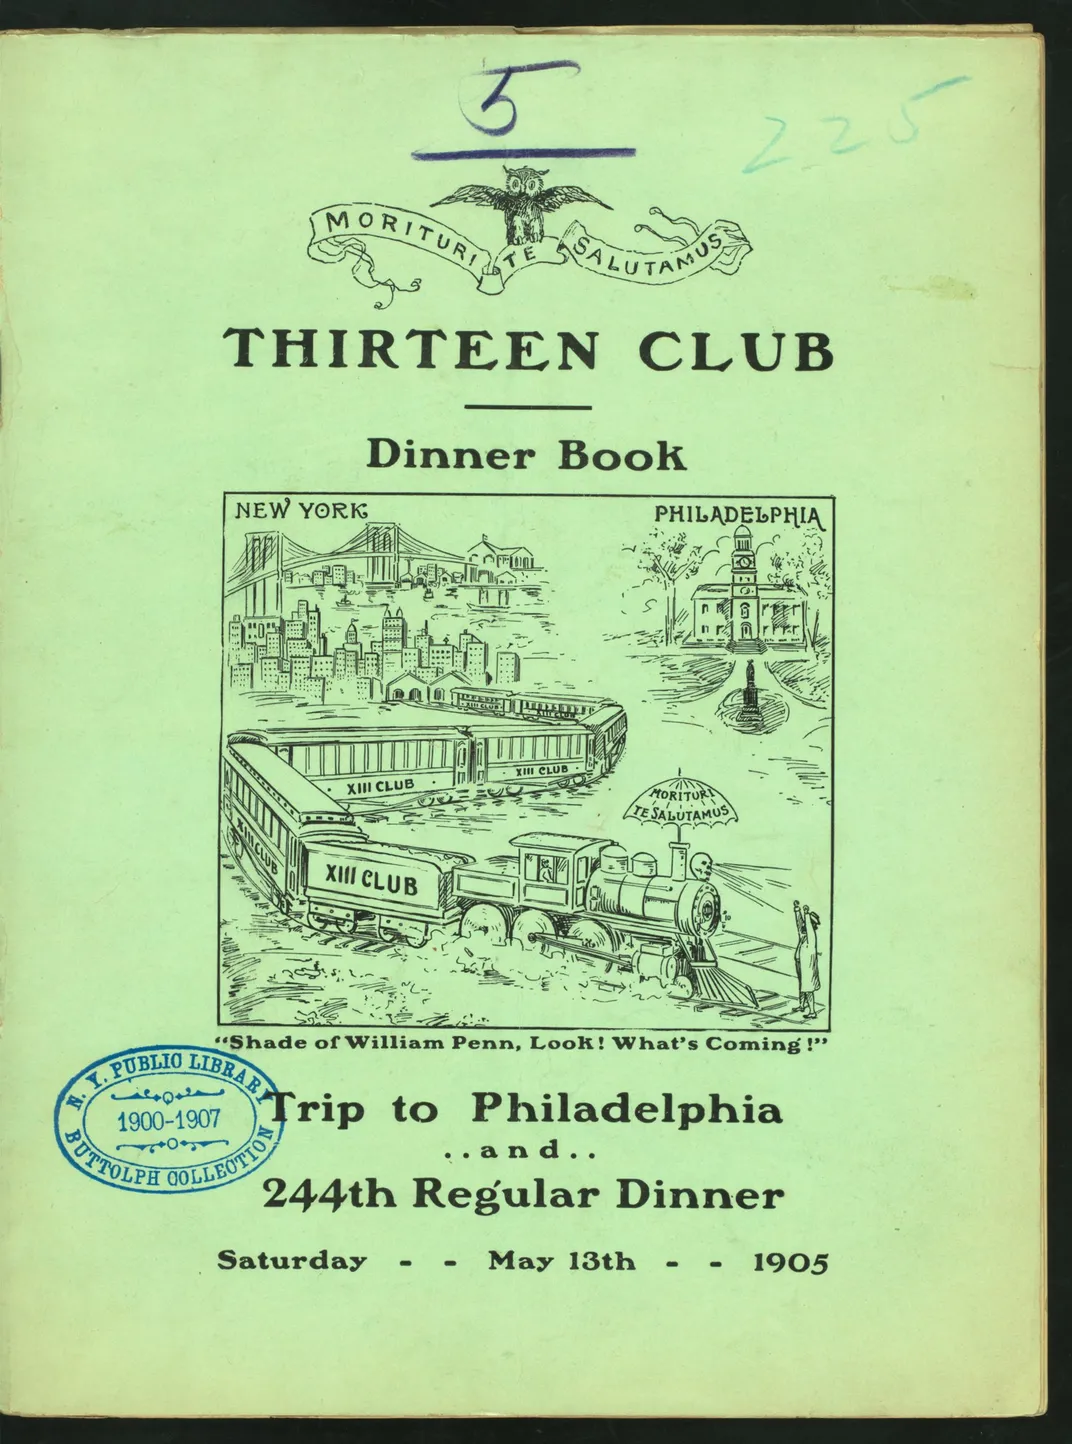 Flyer for the Thirteen Club